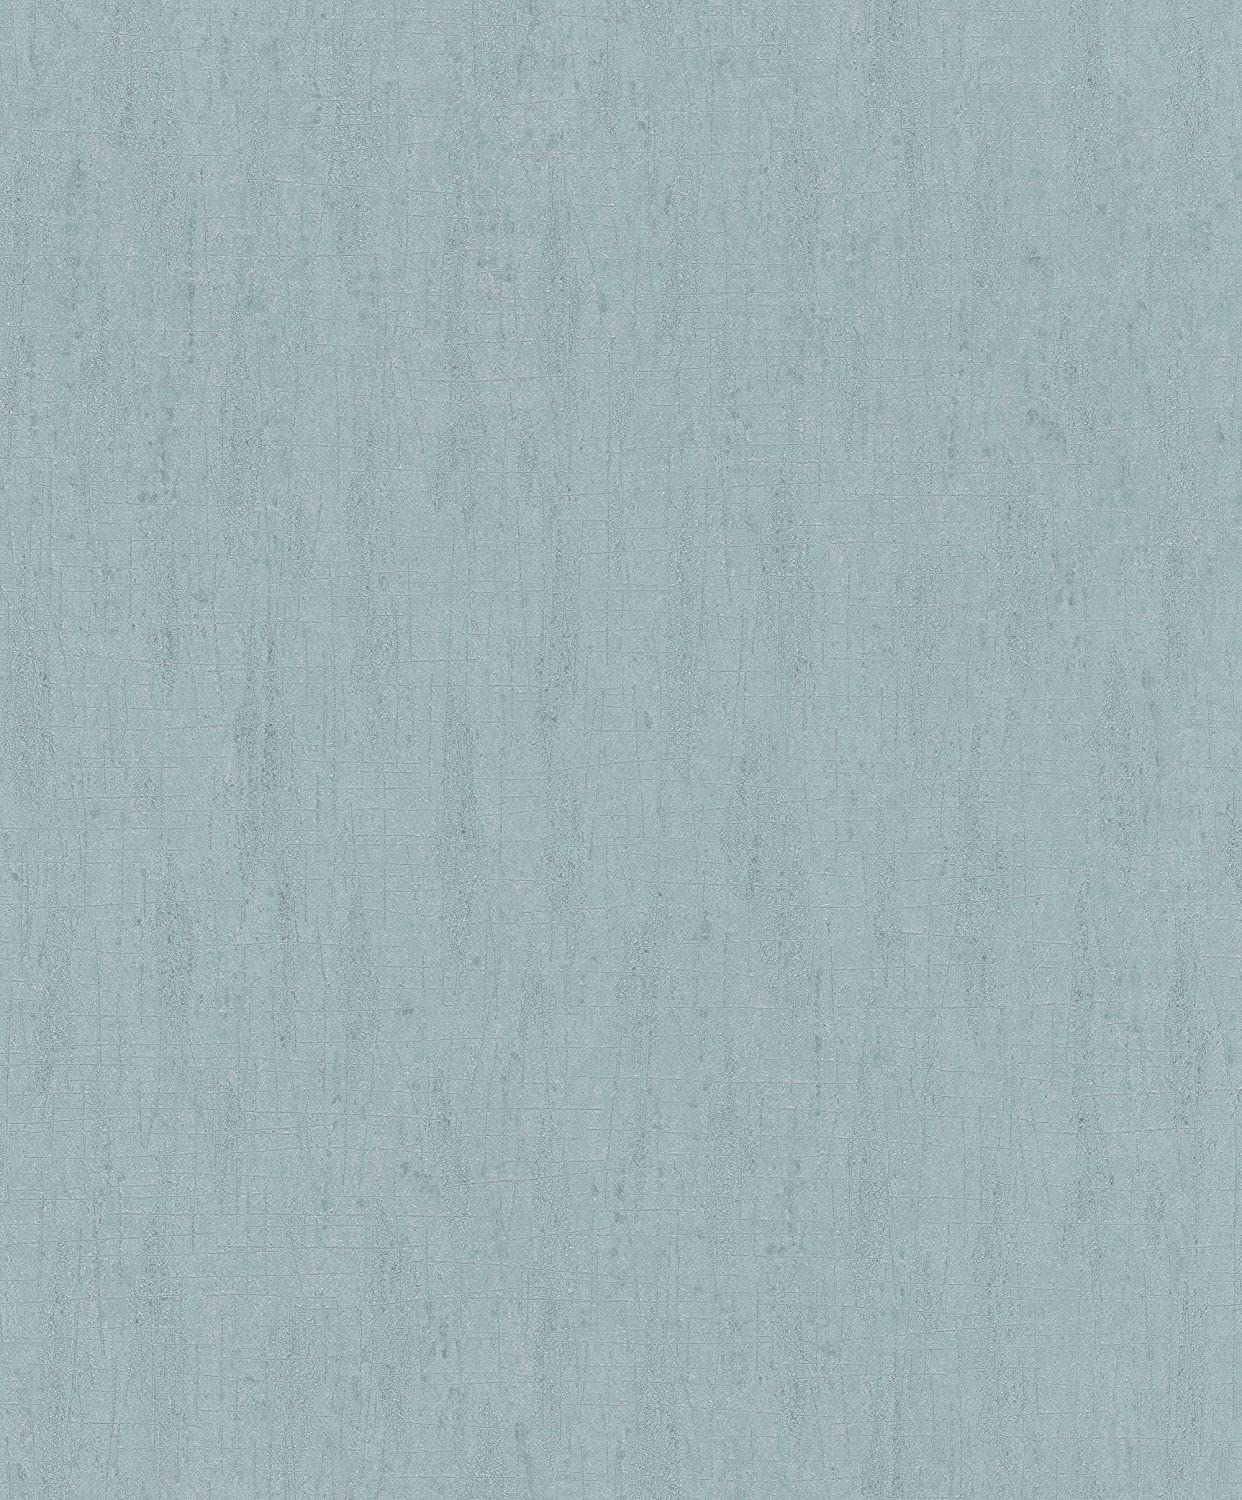 Newroom Striped Brown Waxed Look Modern Grey Non-Woven Wallpaper Modern Striped Design Look Wallpaper Country House with Trestle Guide